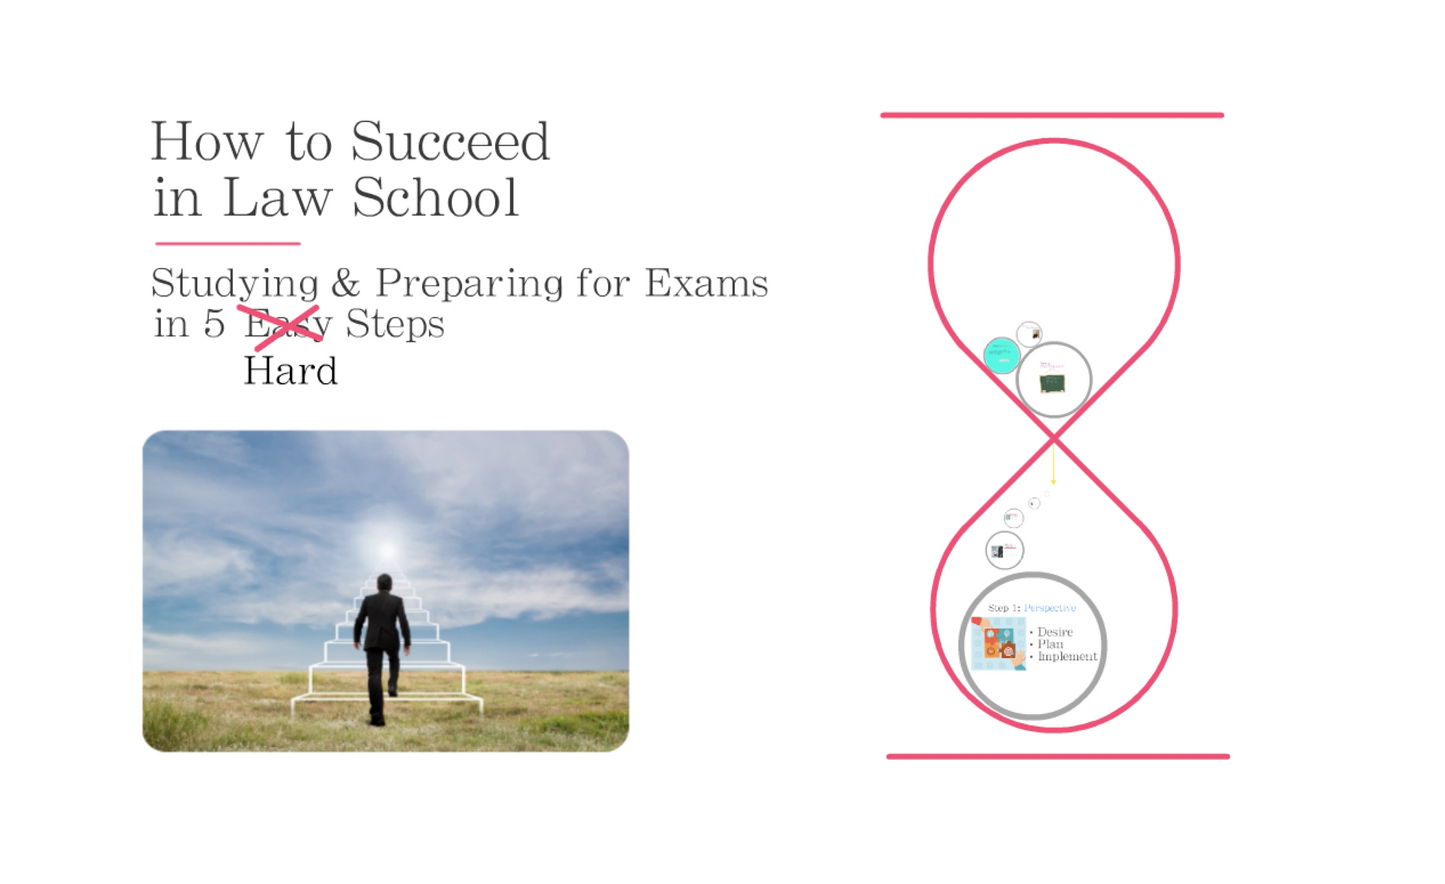 How to Succeed in Law School in 5 Hard Steps